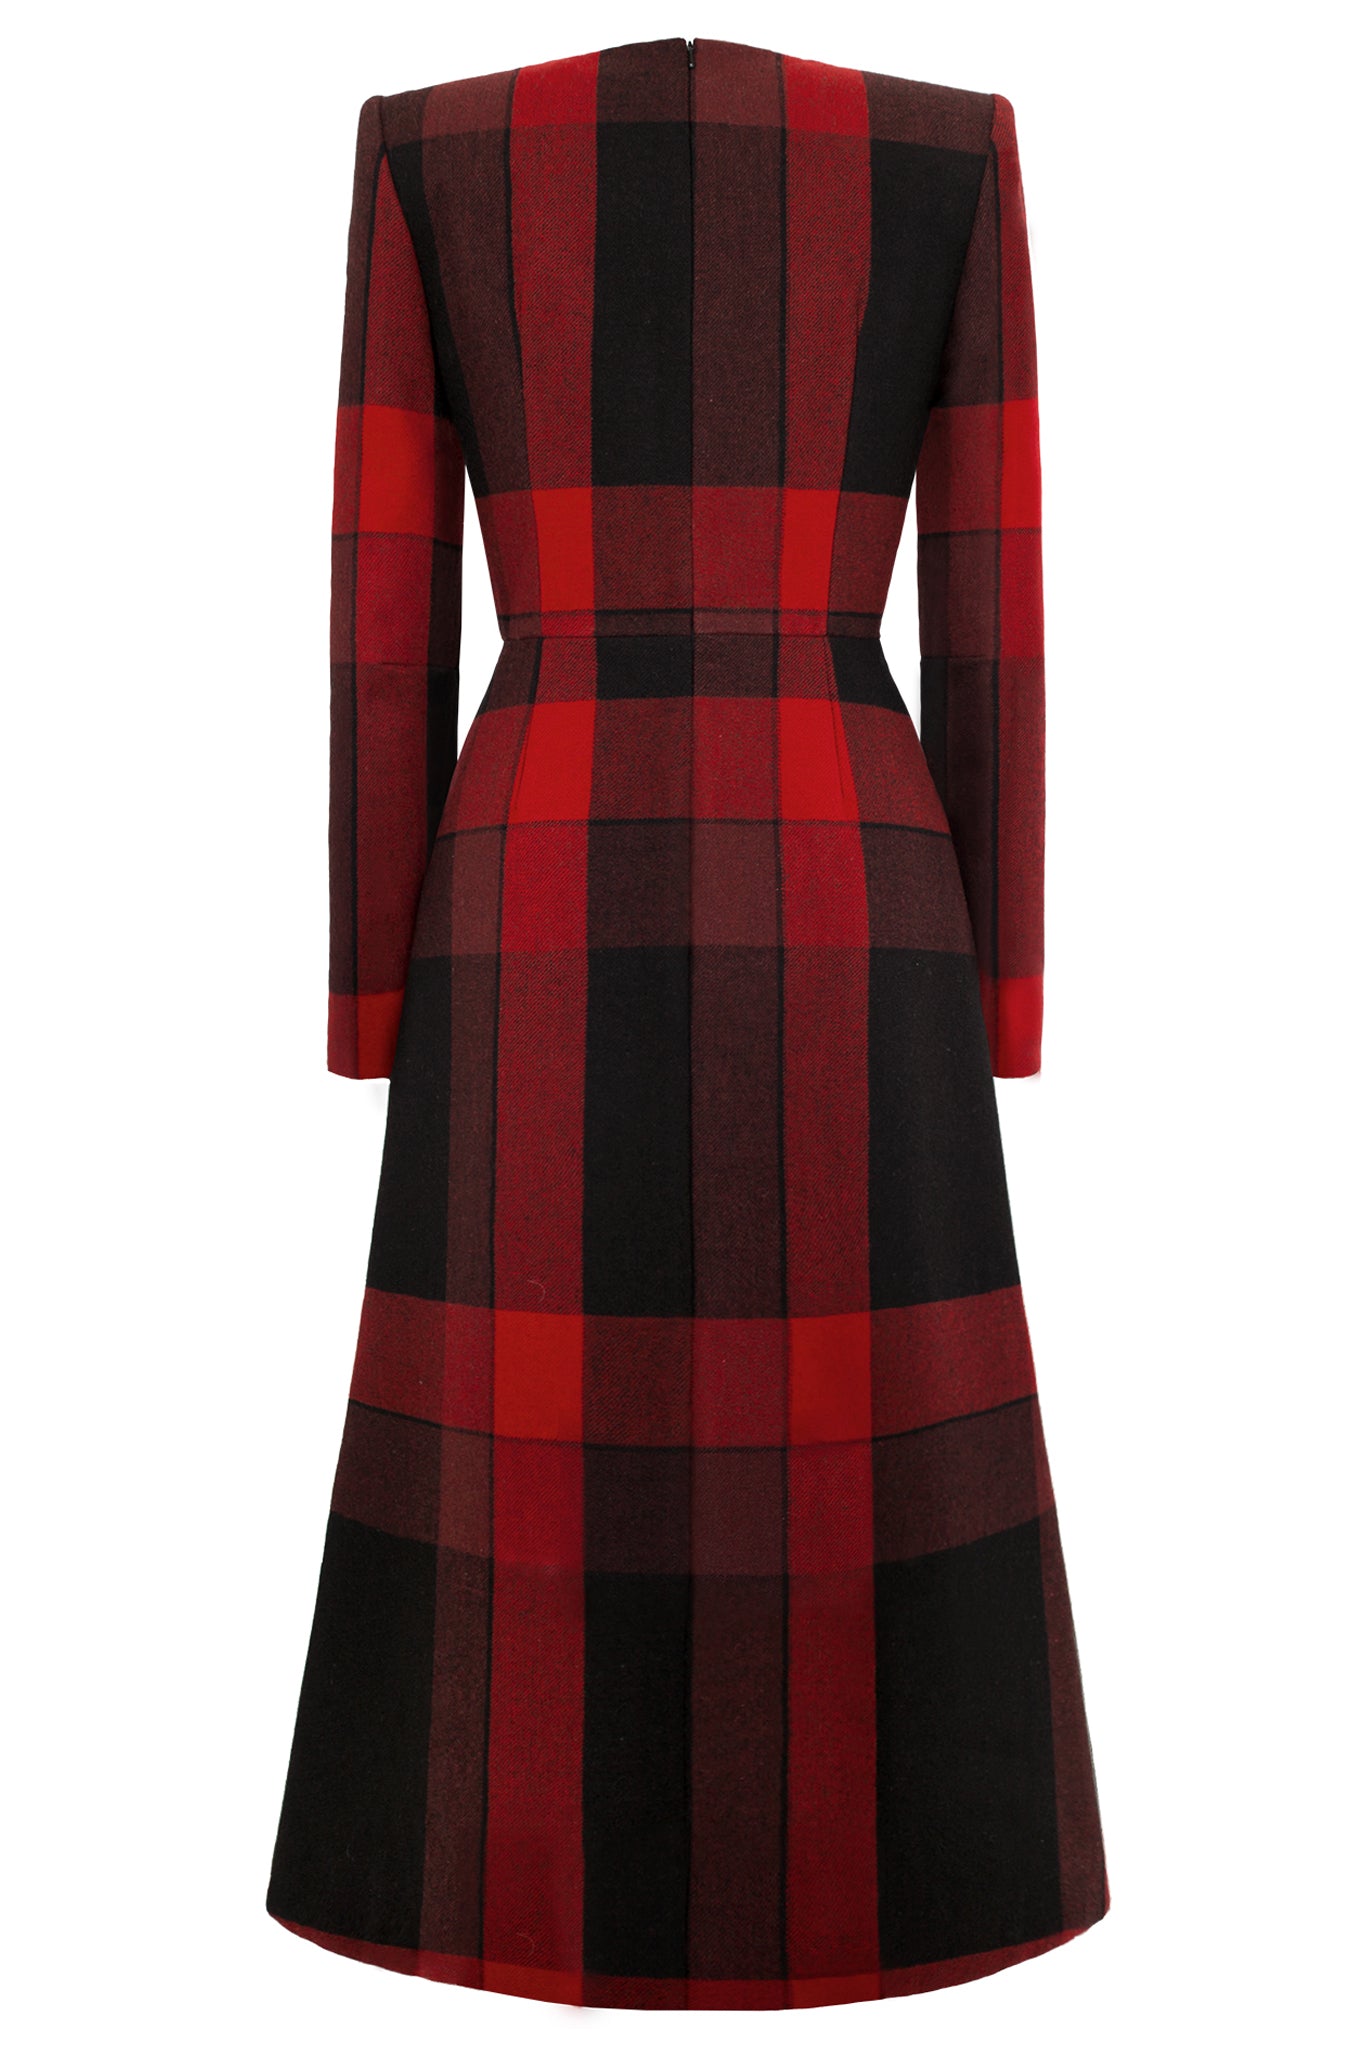 CIMONE AW17 3/4 length red and black wool tartan dress, first seen on the catwalk during London Fashion Week. The perfect statement winter dress.